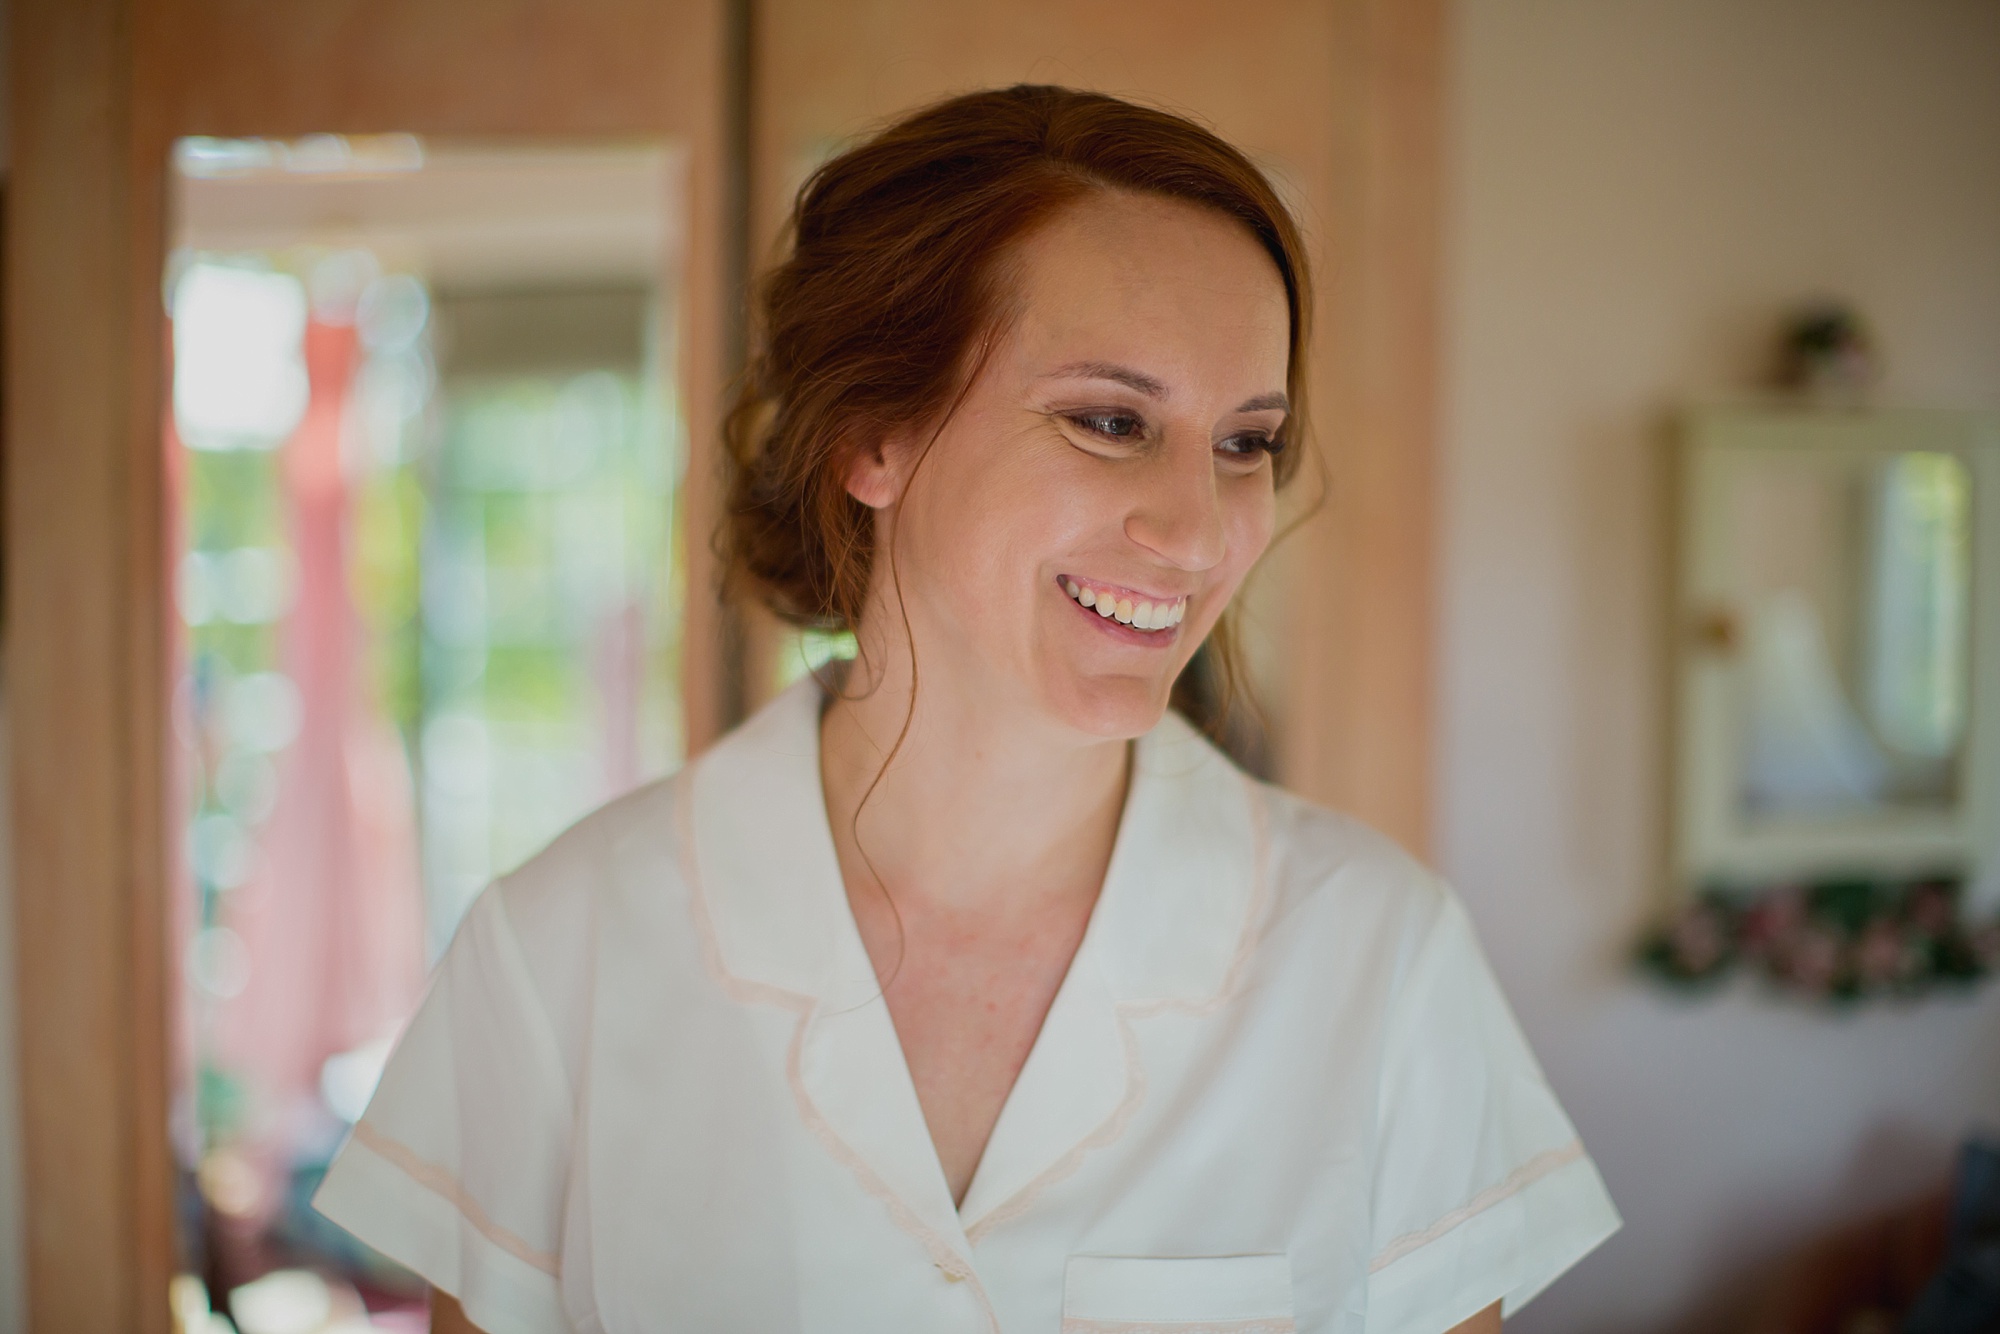 The bride smiles in her white button up shirt and her out of focus blush gown can be seen hanging in the doorway behind her.